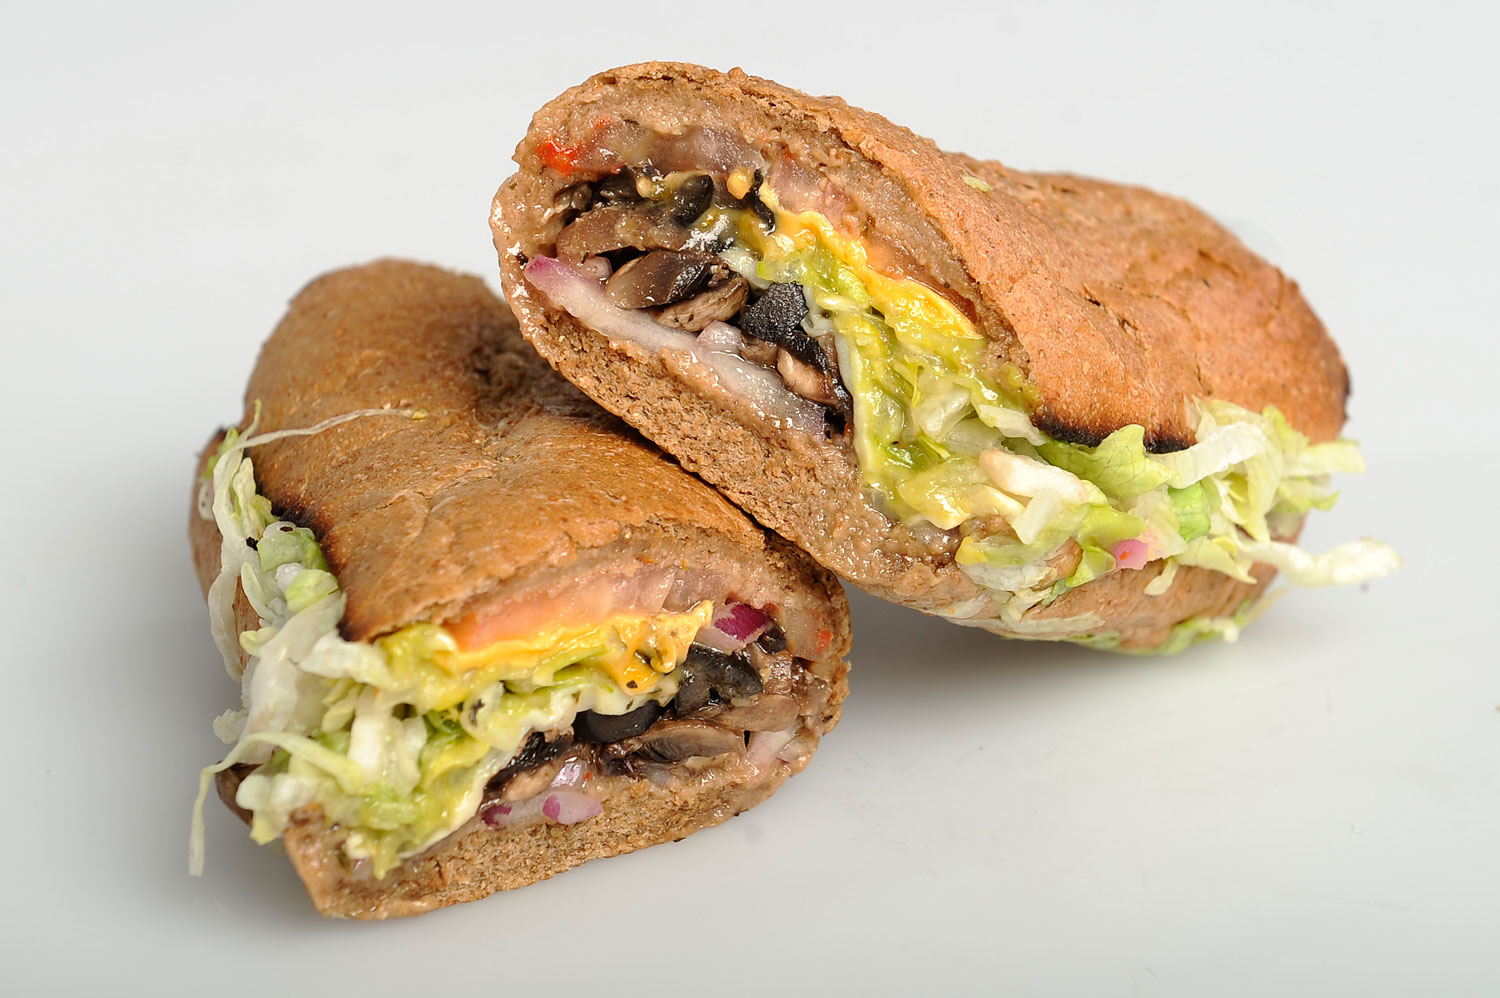 A veggie sub from Quiznos.